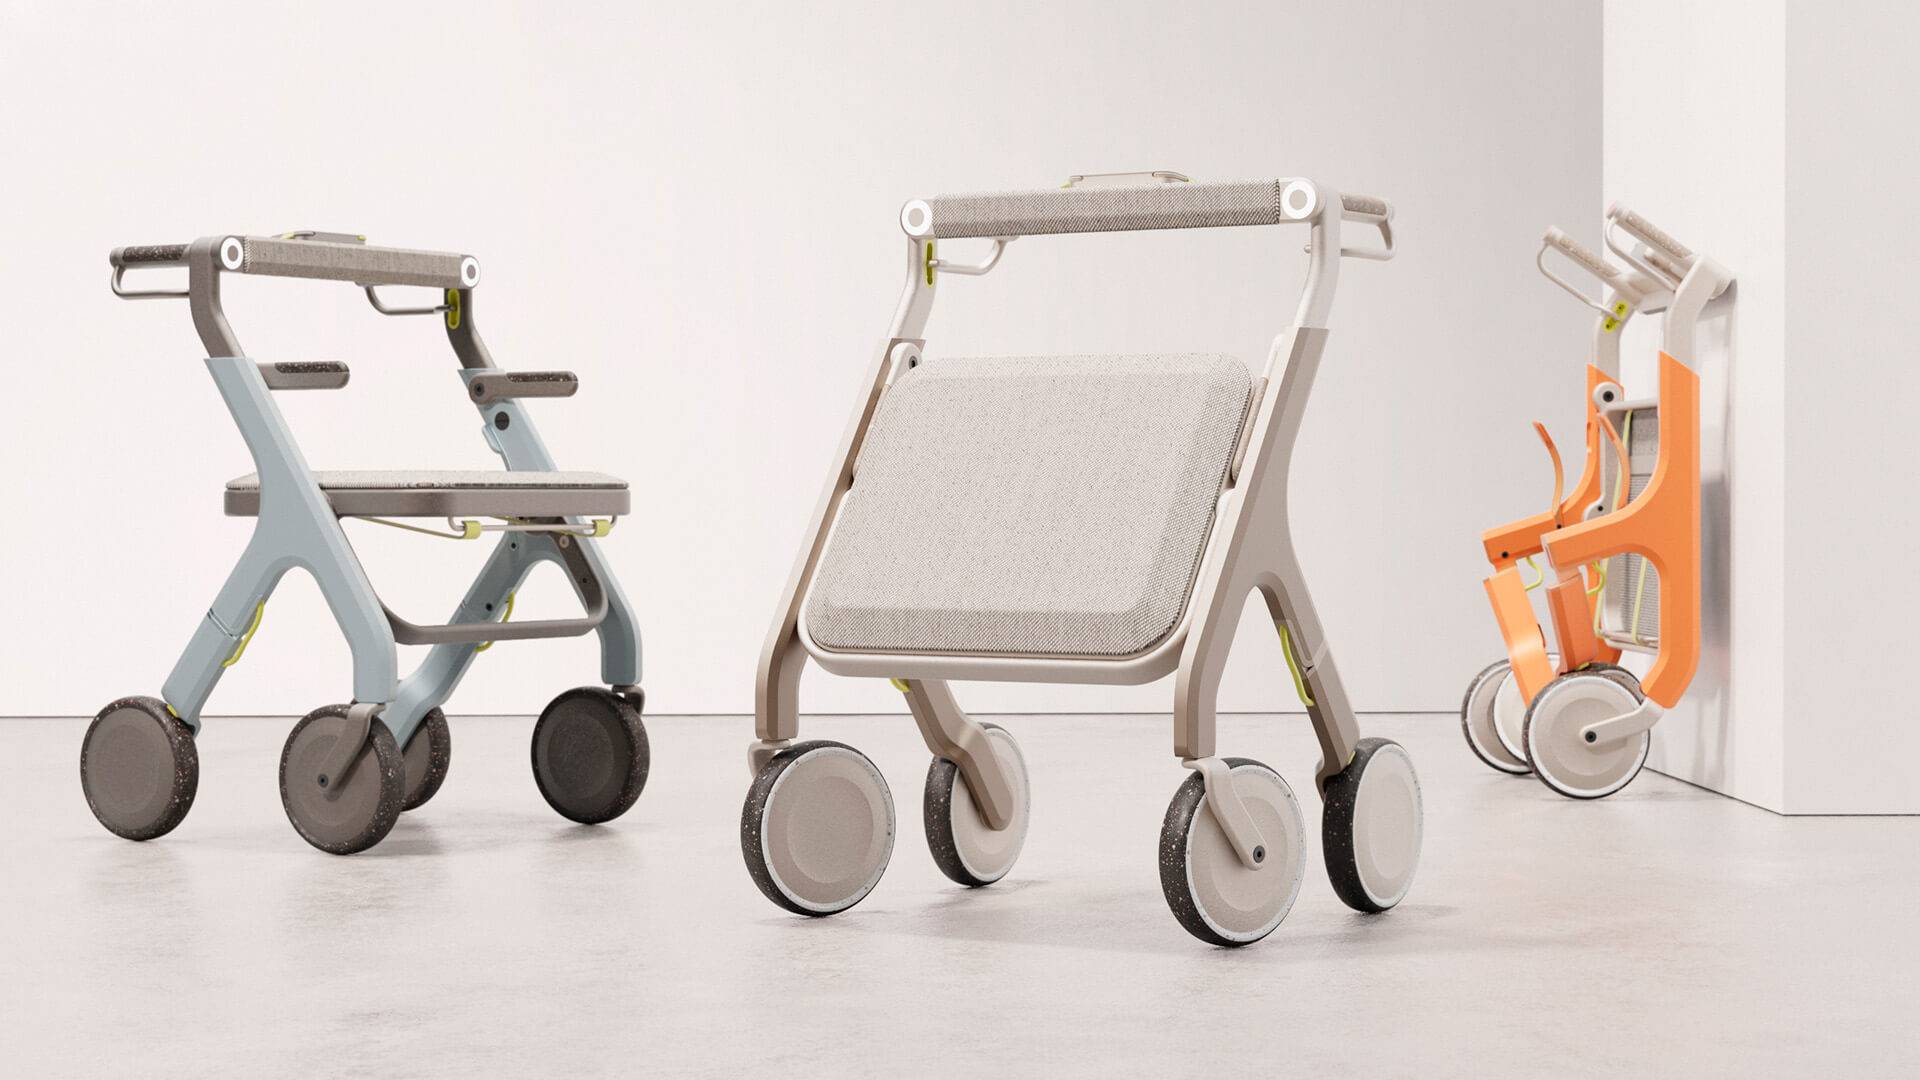 3 colour options of the WALKABLE, showing their different functionalities